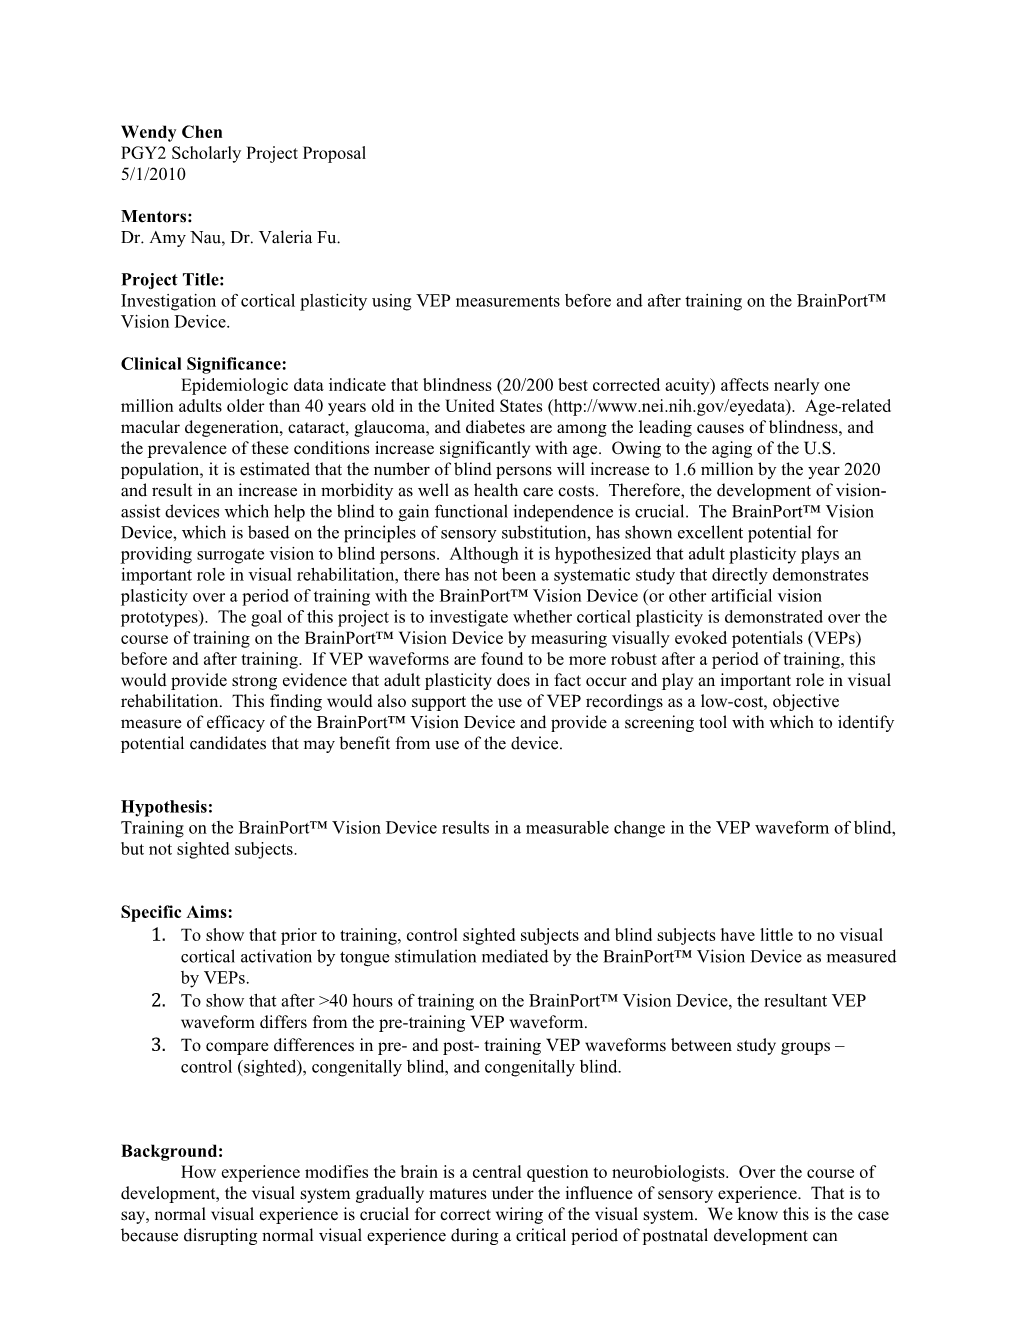 PGY2 Scholarly Project Proposal